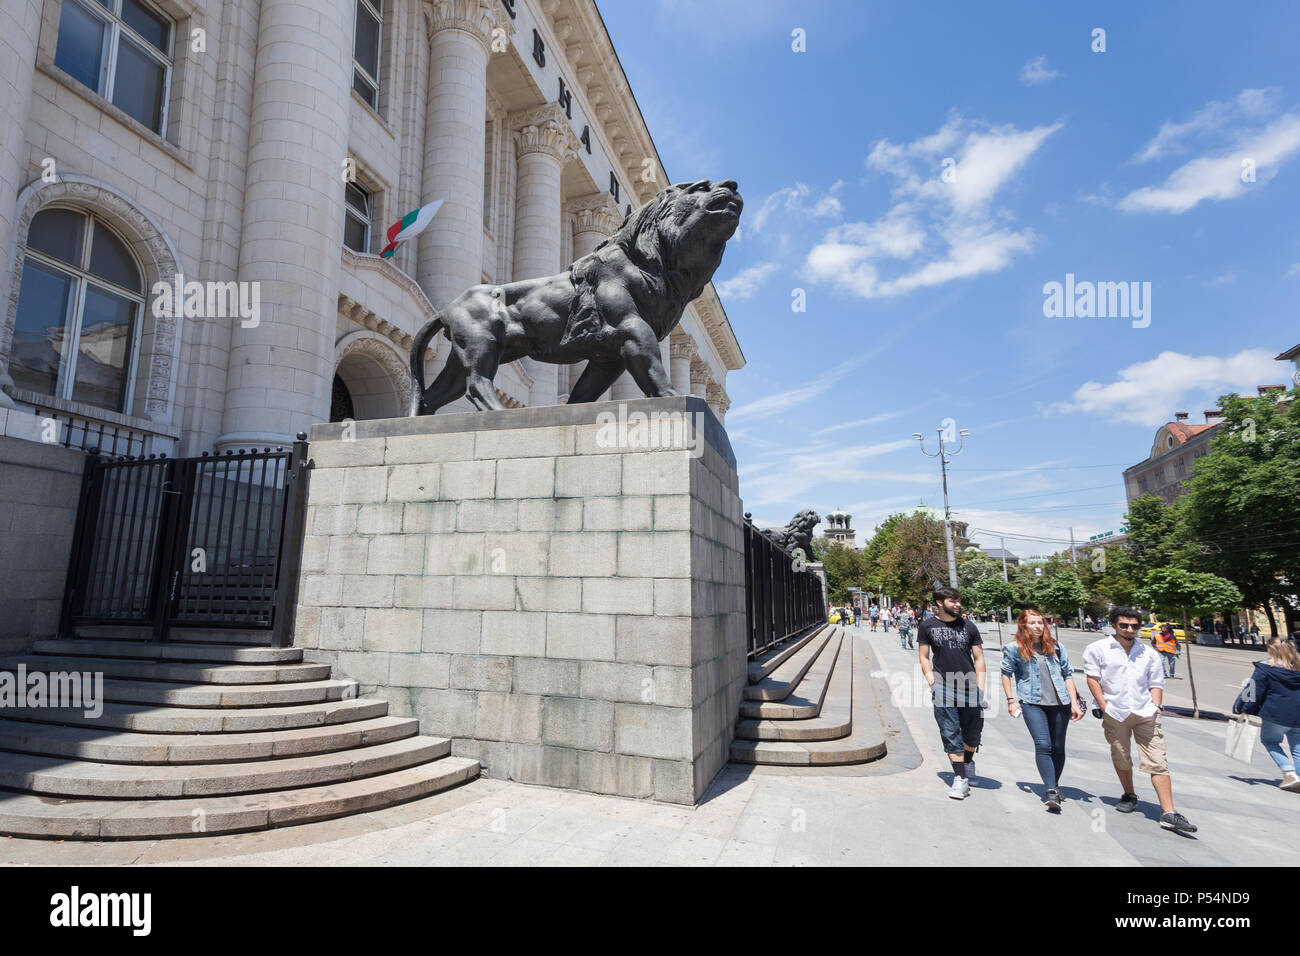 SOFIA, BULGARIA - JUNE 23: People enjoy the sunny weather in front of Sofia Court House in Sofia, Bulgaria on June 23, 2018. Stock Photo